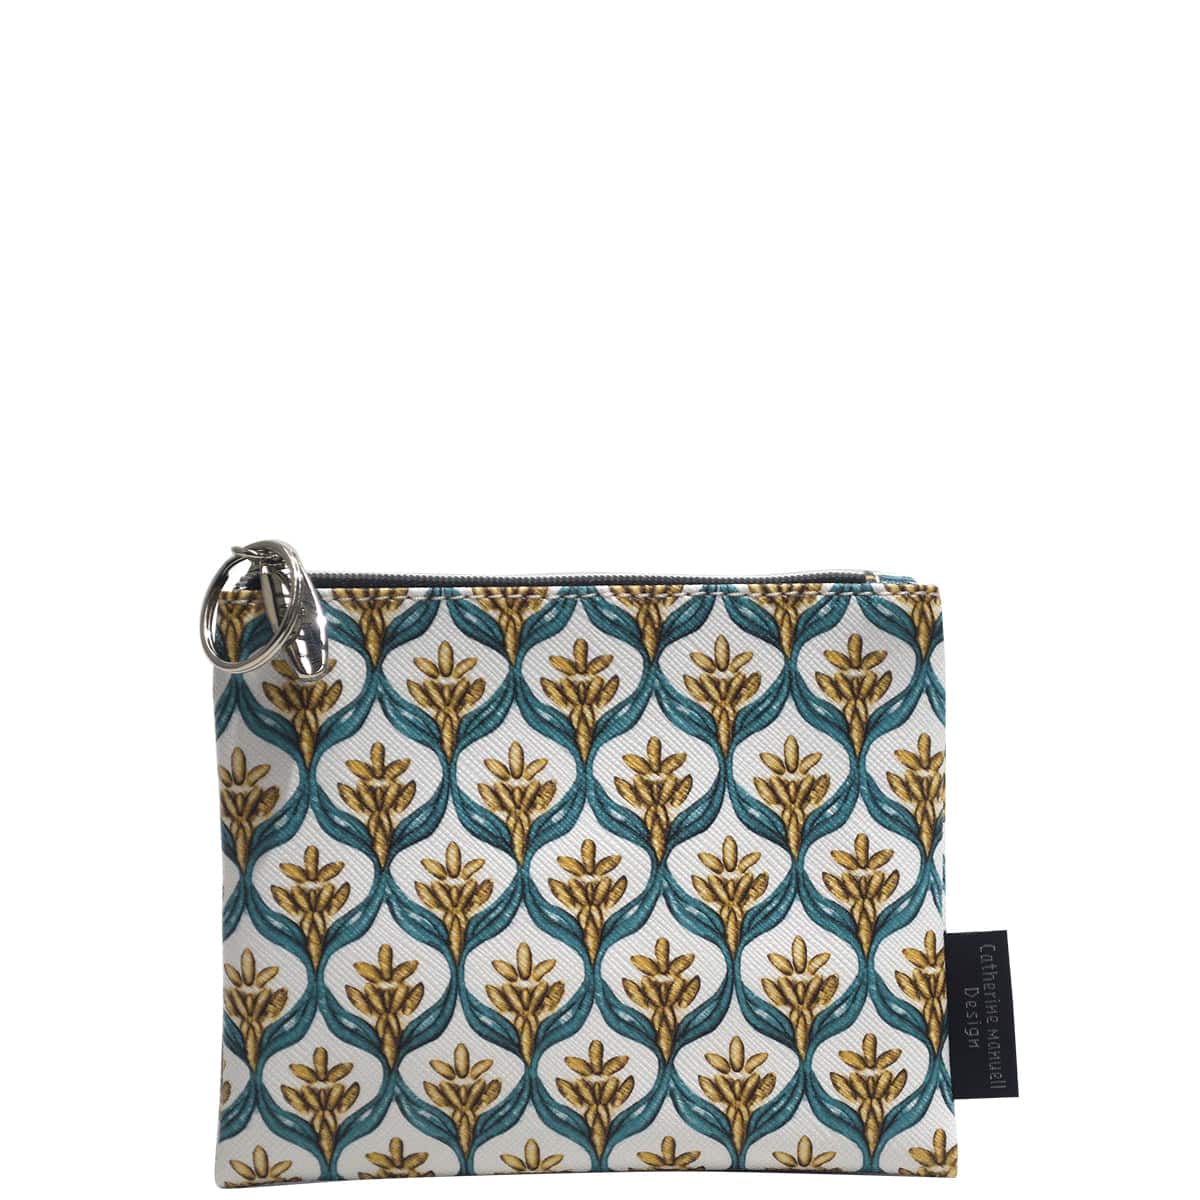 Everyday Purse - French Chateau Blue Sand - 20% off